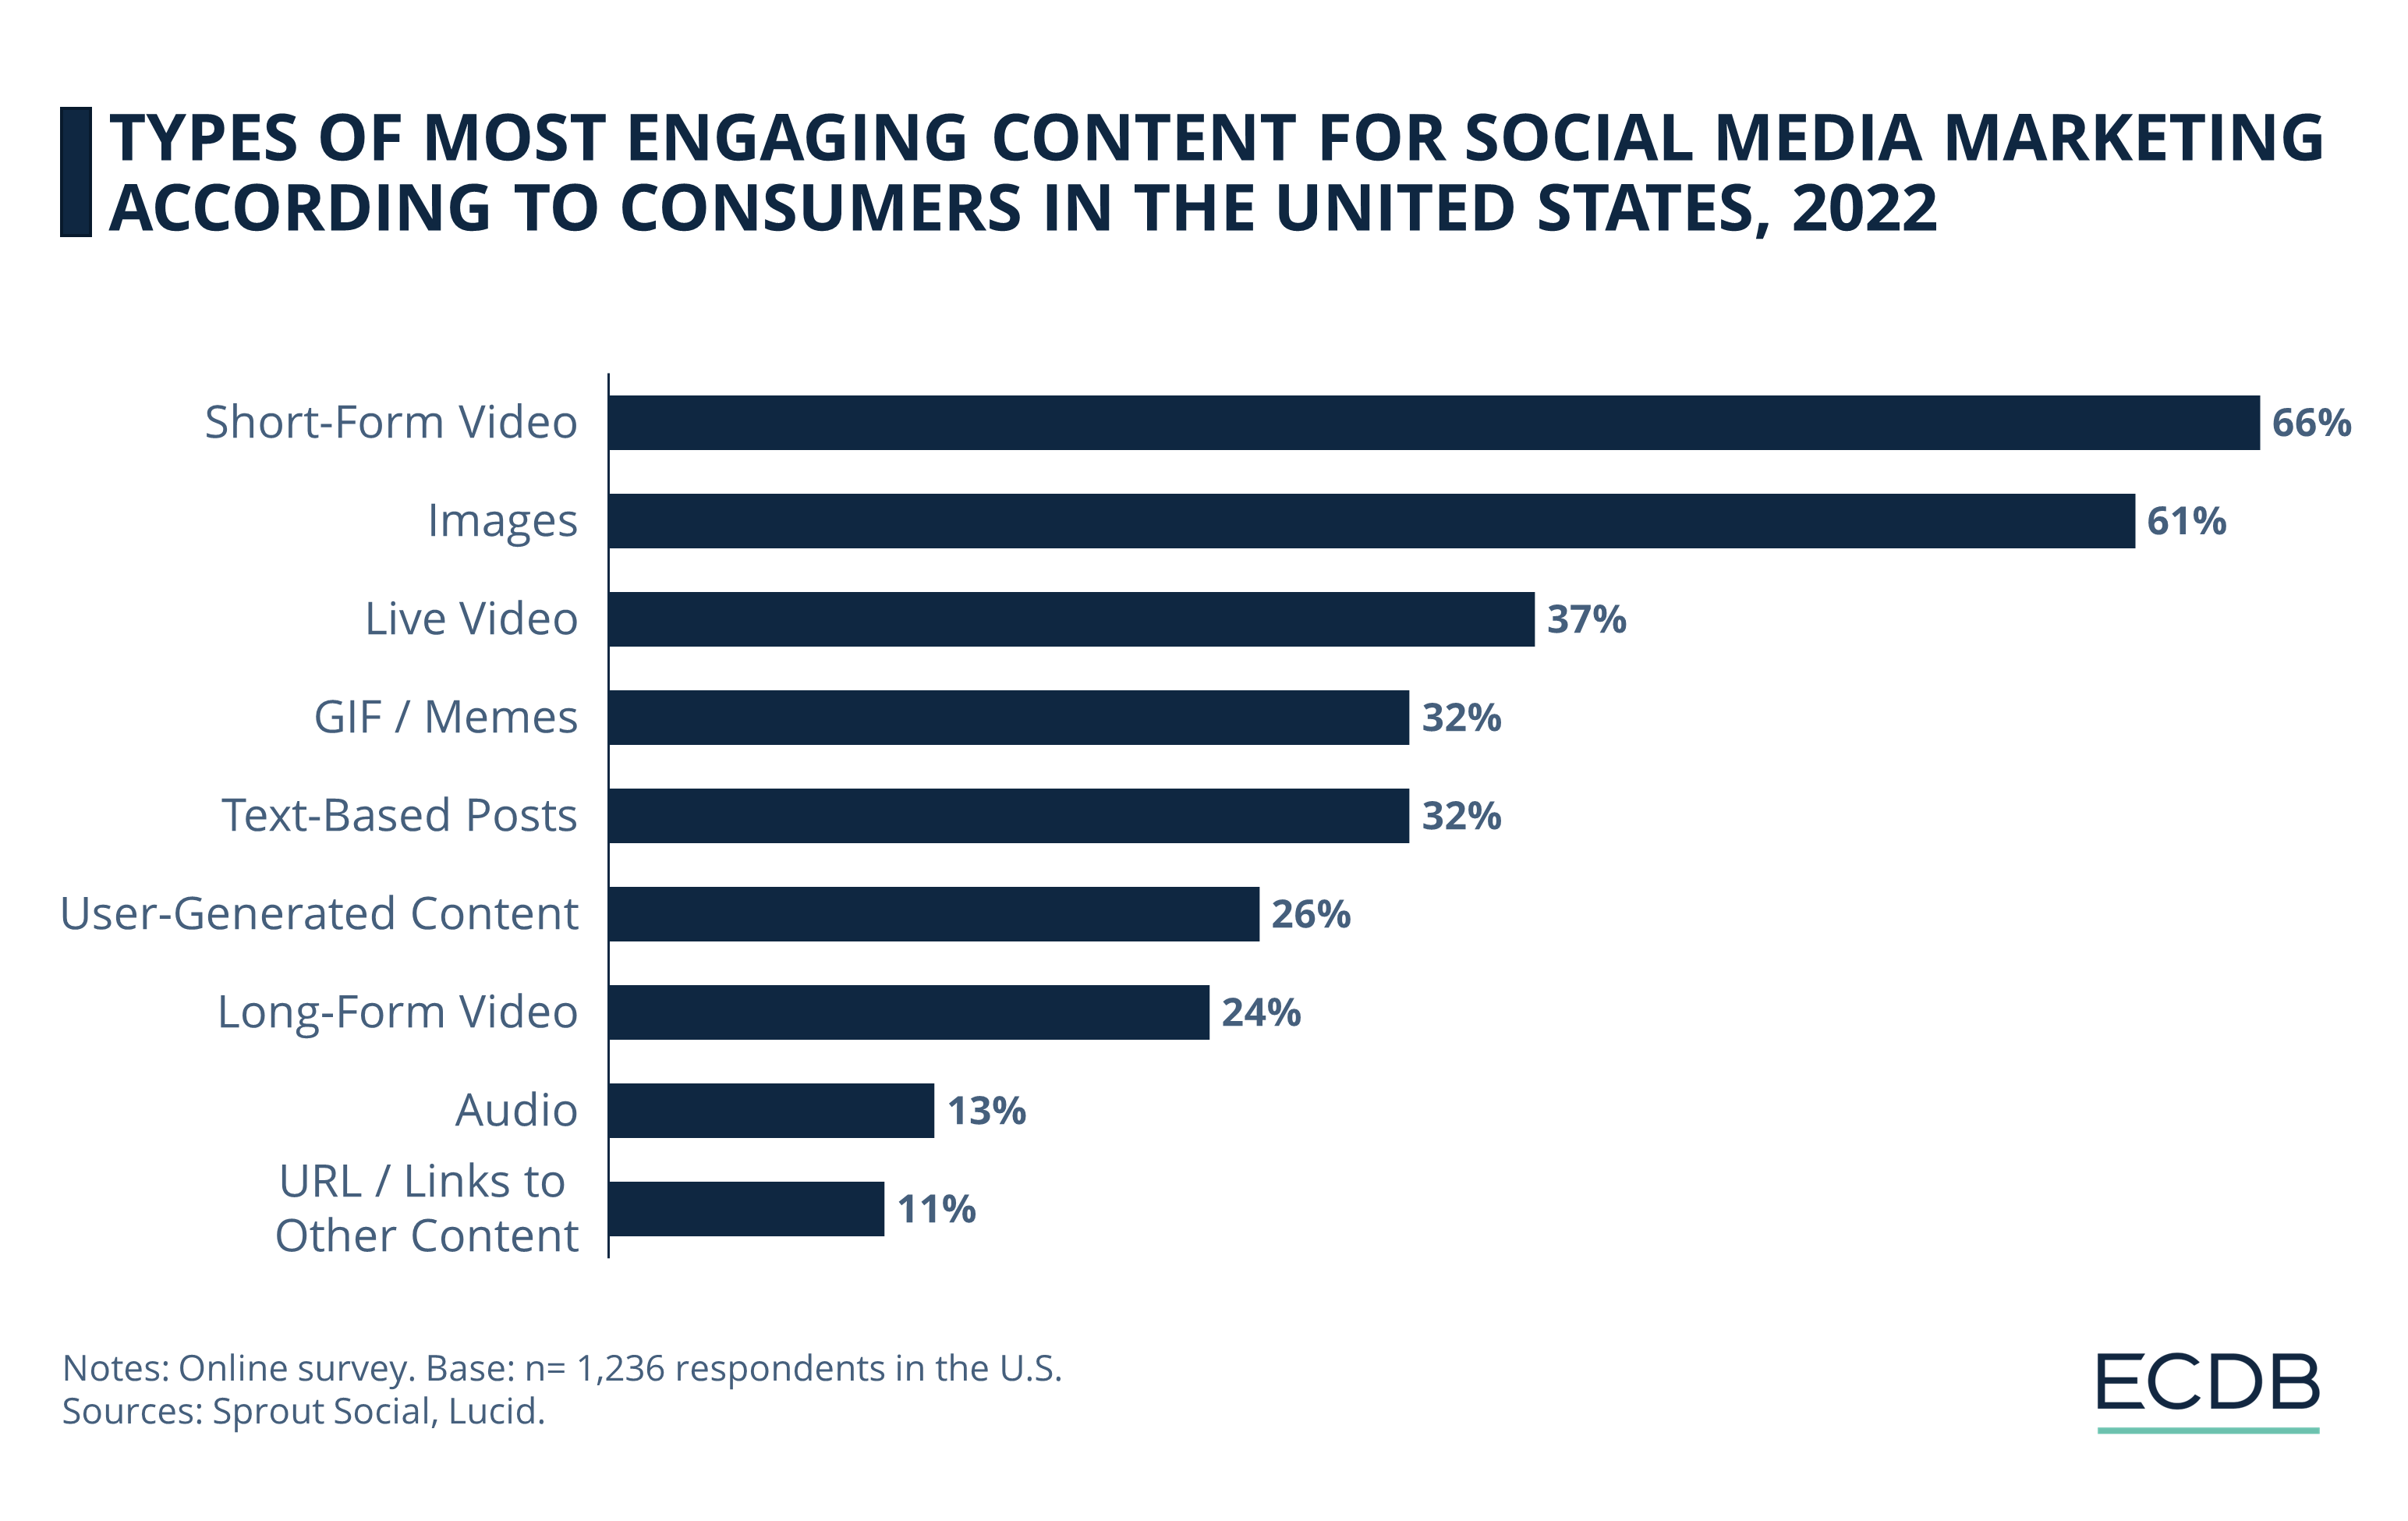 Types of Most Engaging Content for Social Media Marketing According to Consumers in the United States